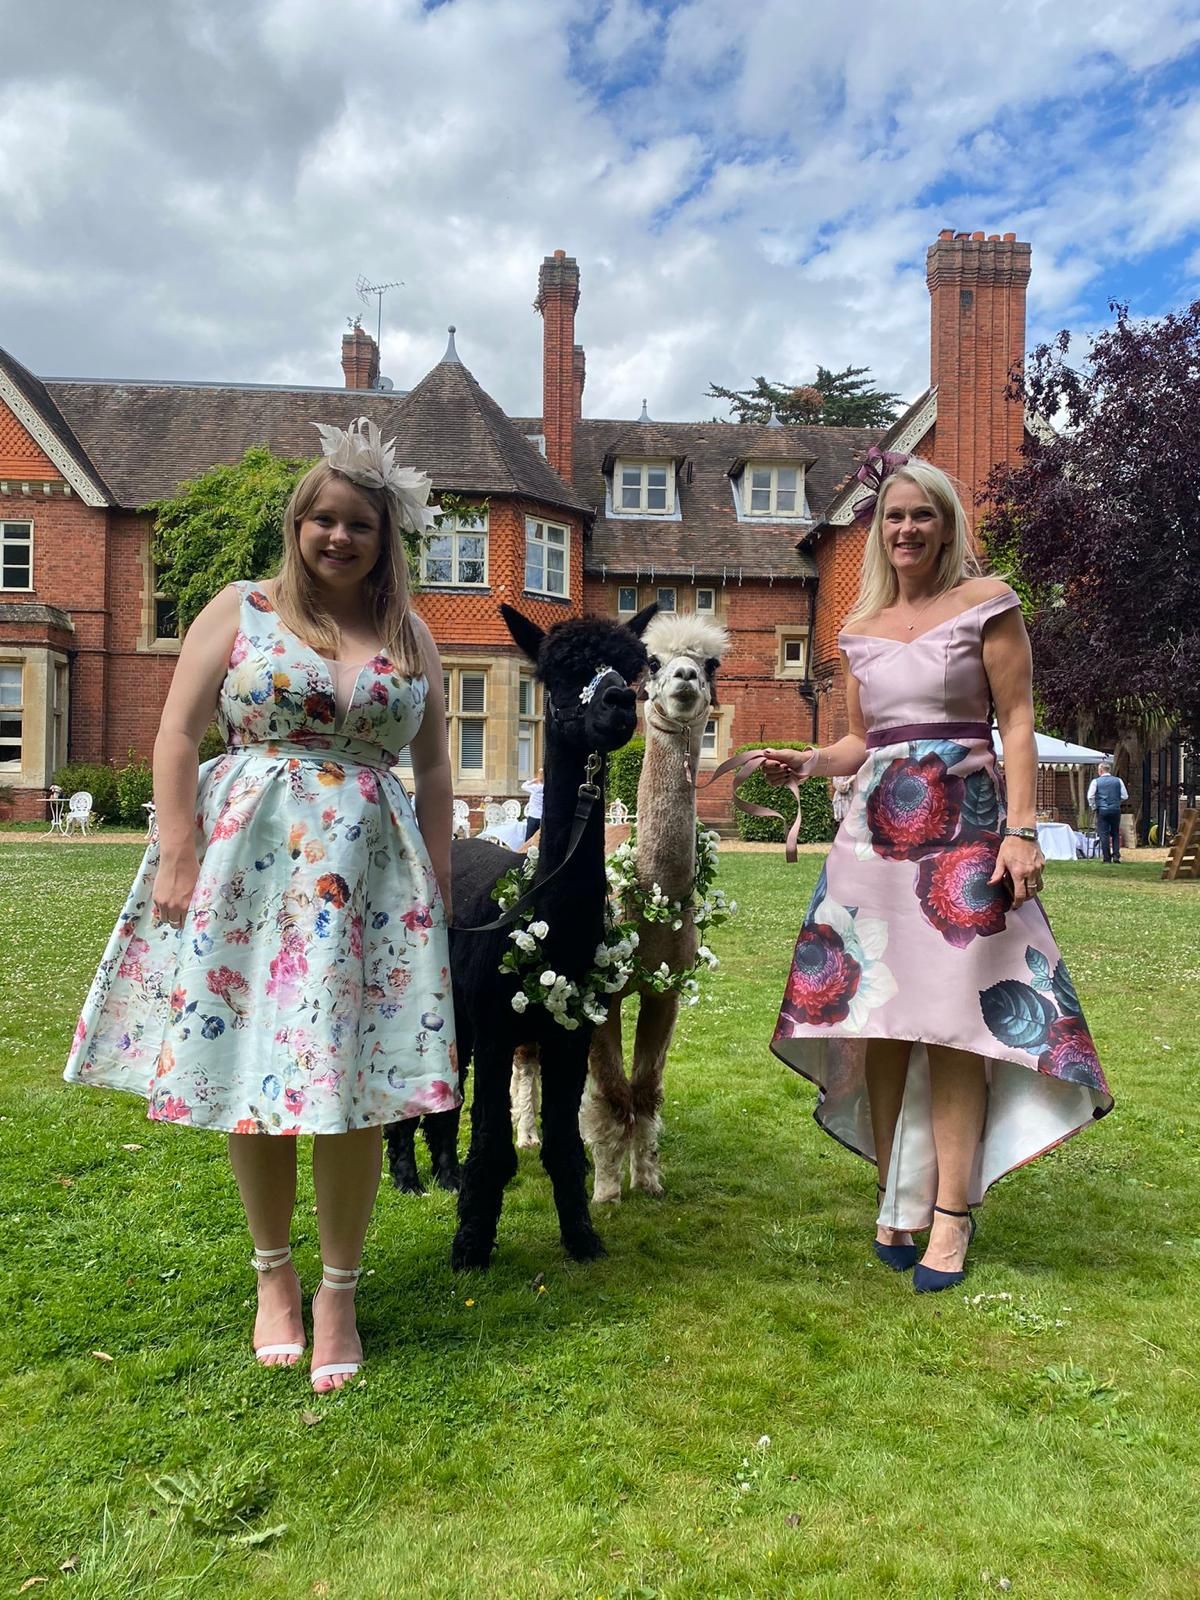 Oriontree Alpacas & Poultry has joined UKbride